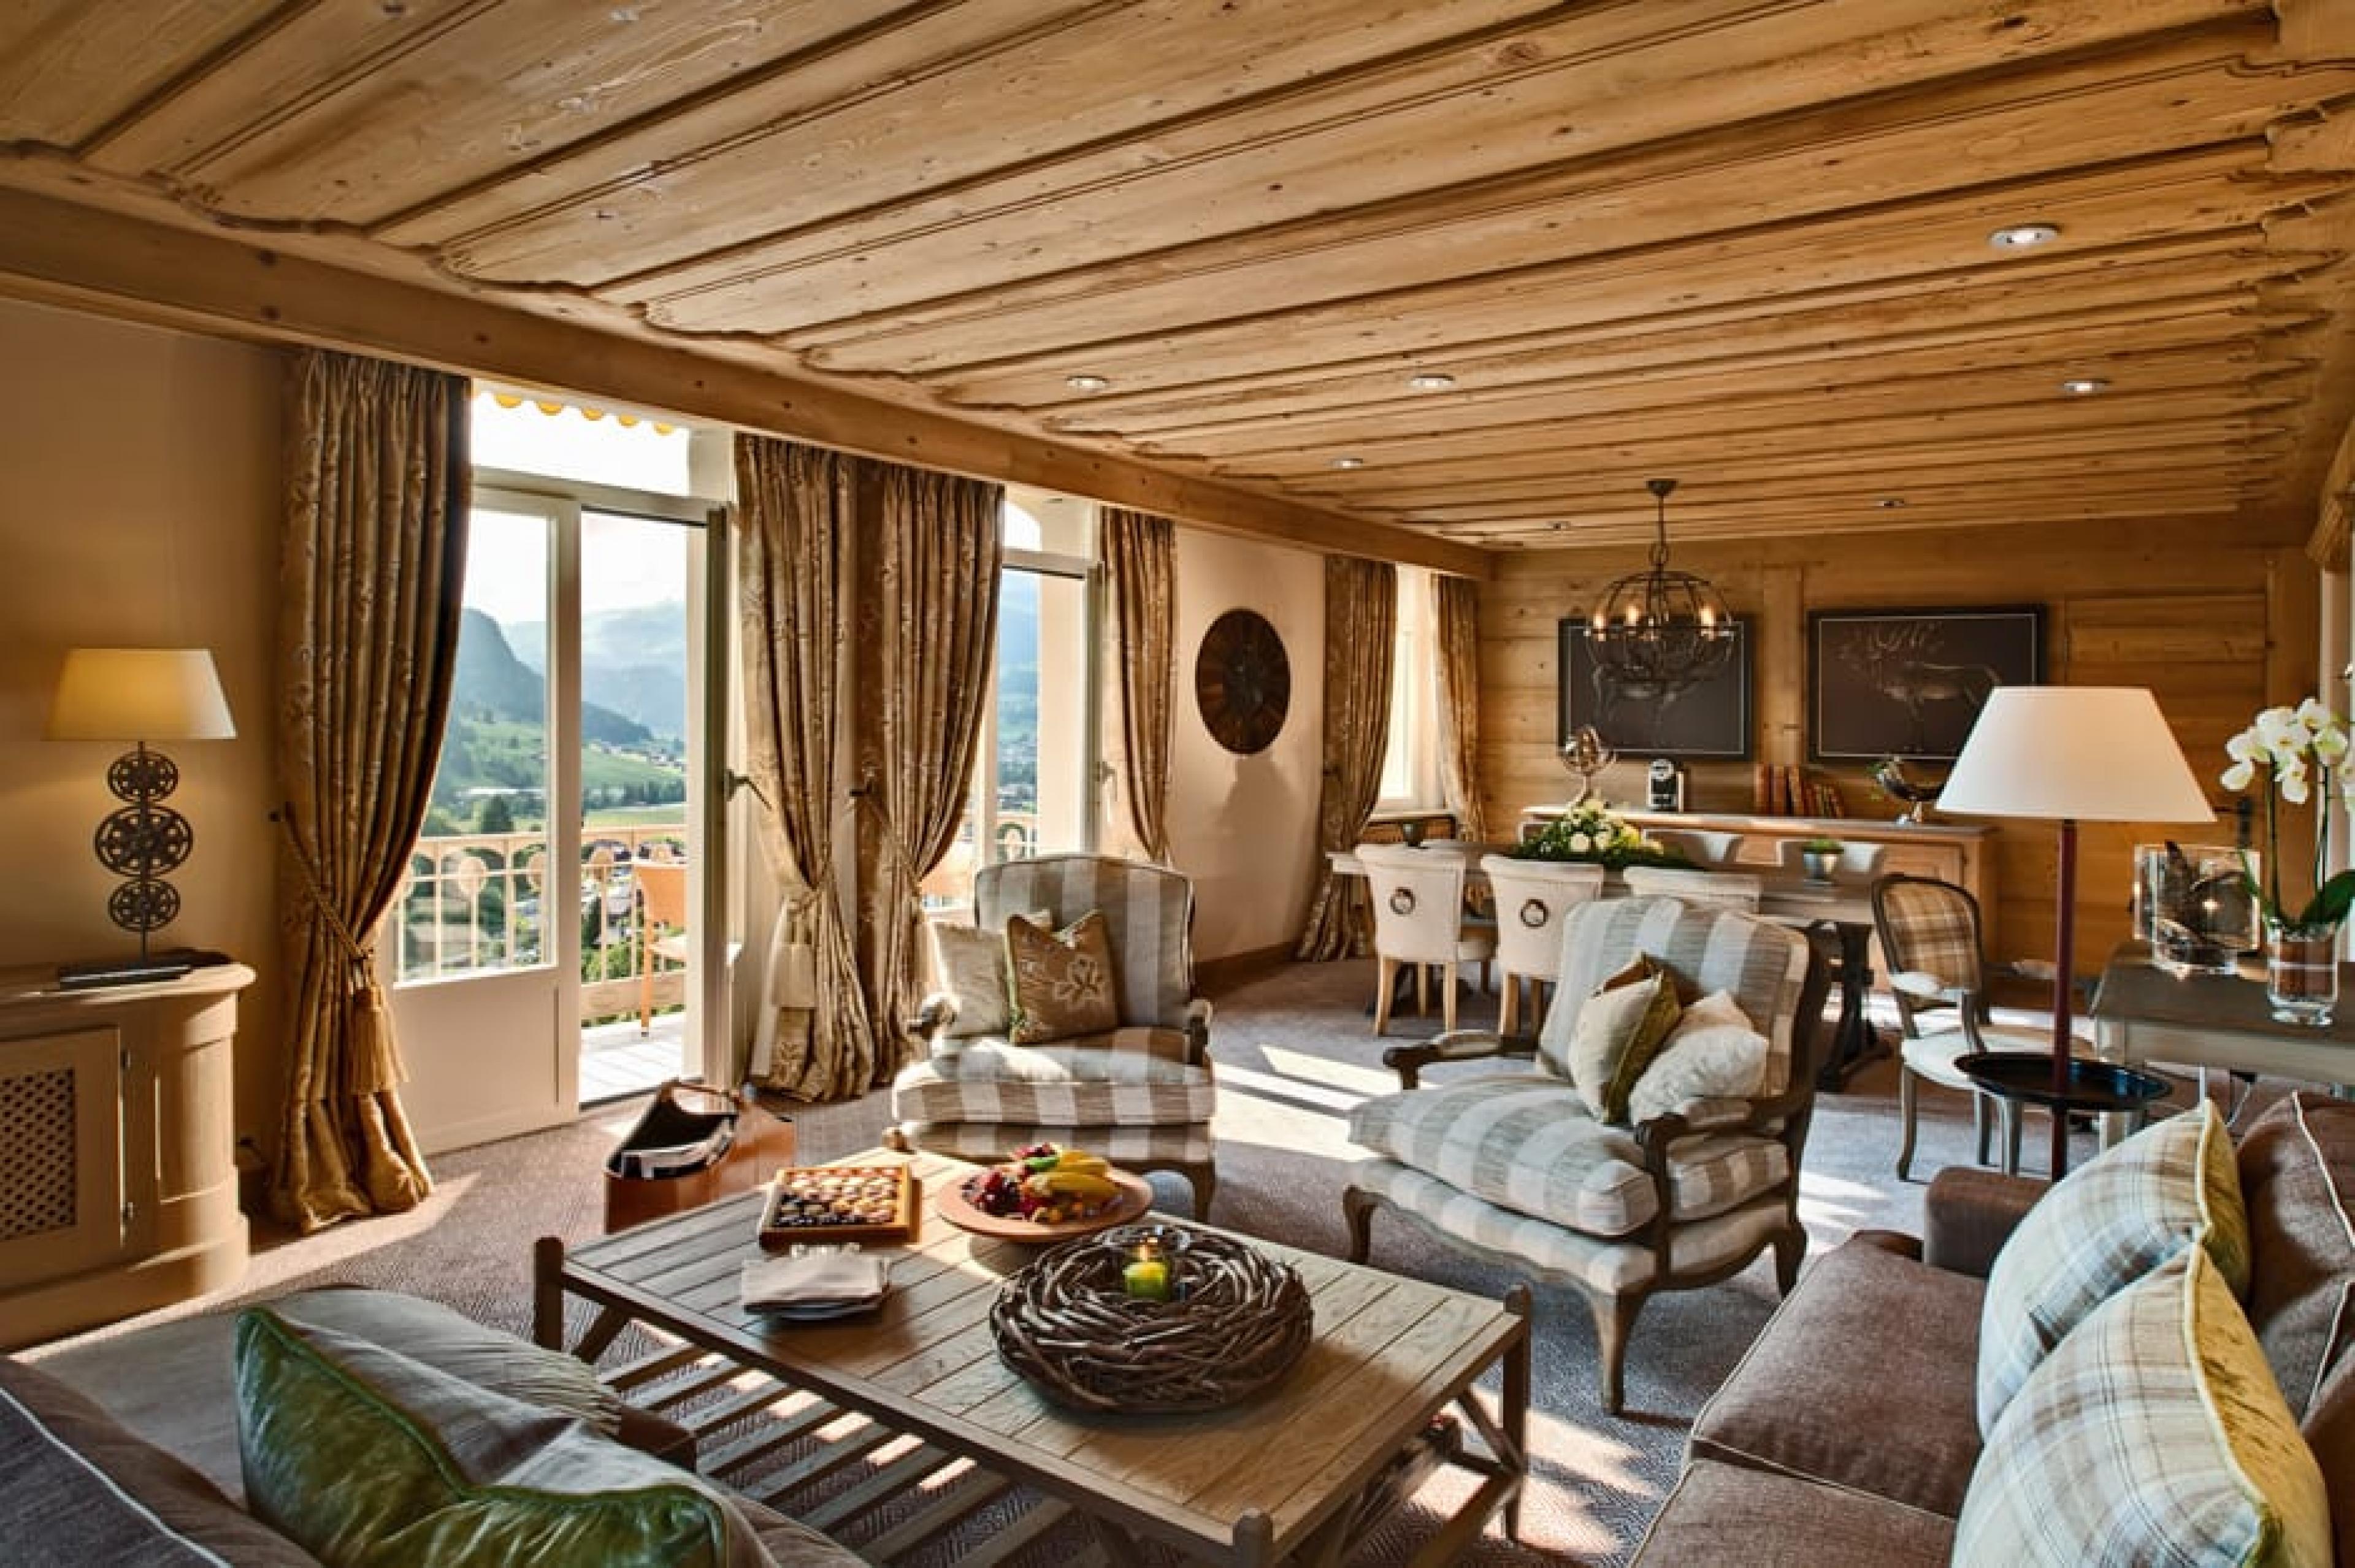 Deluxe Suite Living Room at Palace Hotel, Gstaad, Switzerland